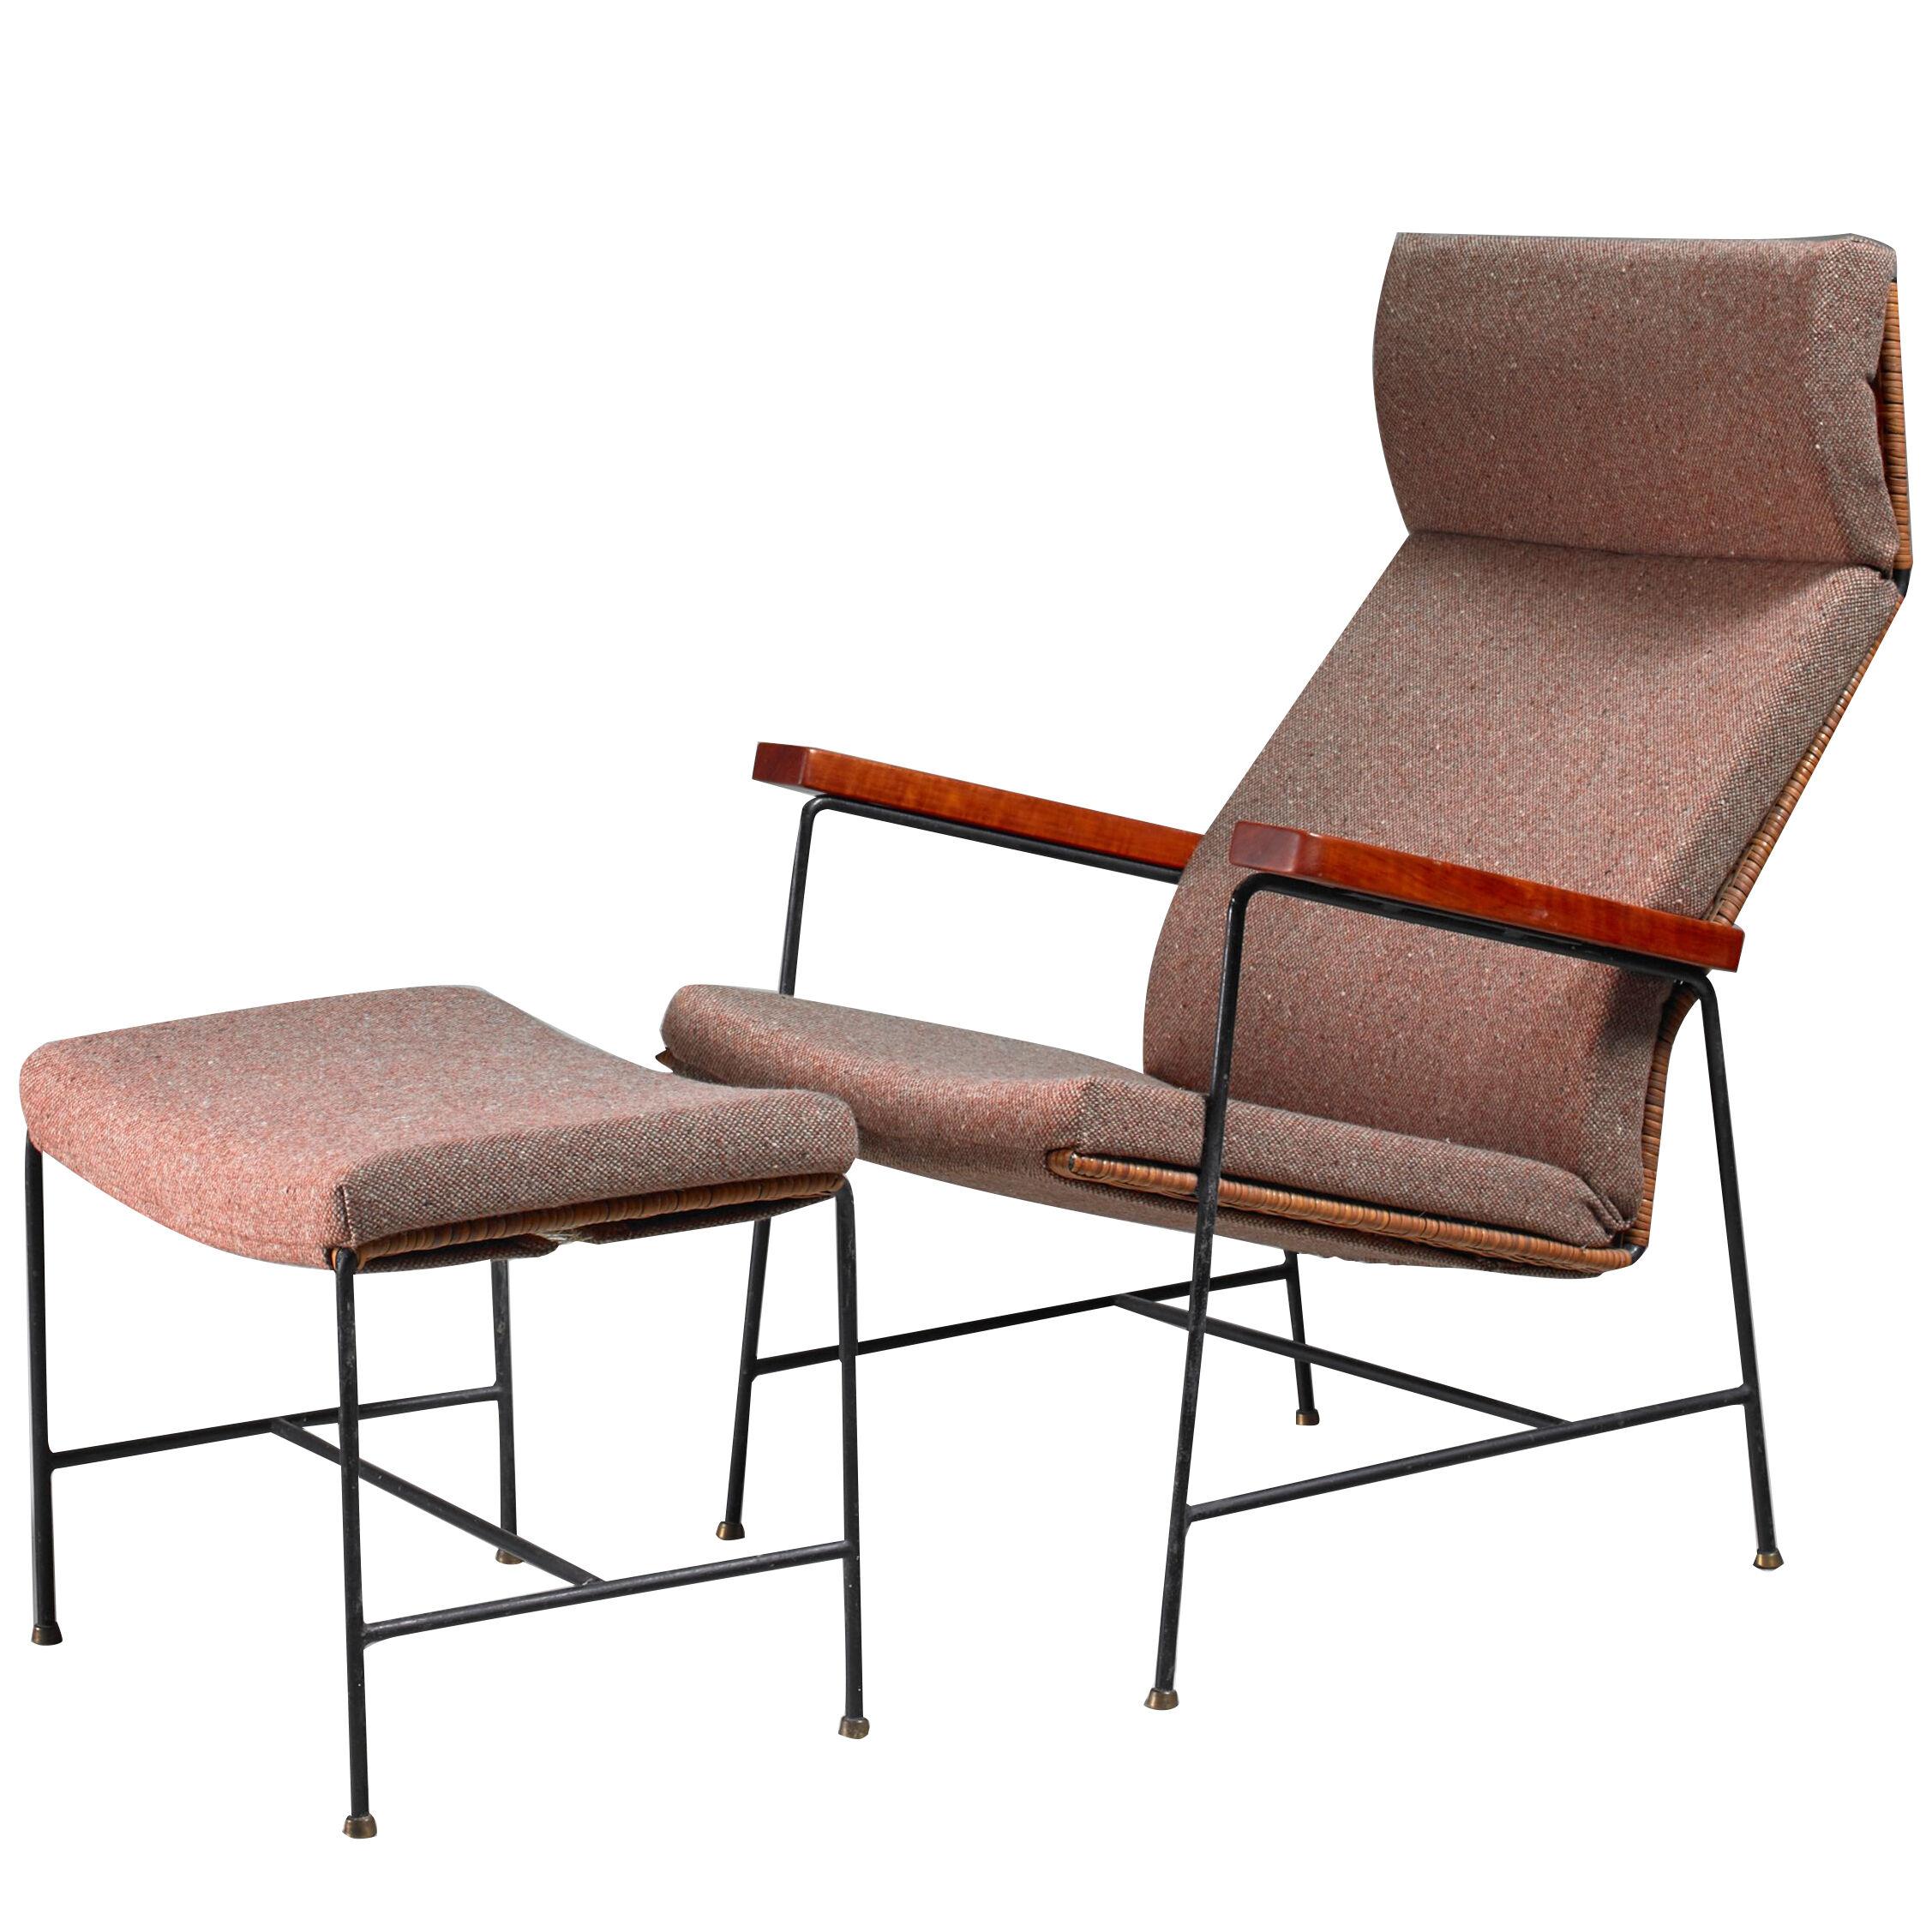 Arden Riddle Lounge Chair with Ottoman, US, 1960s